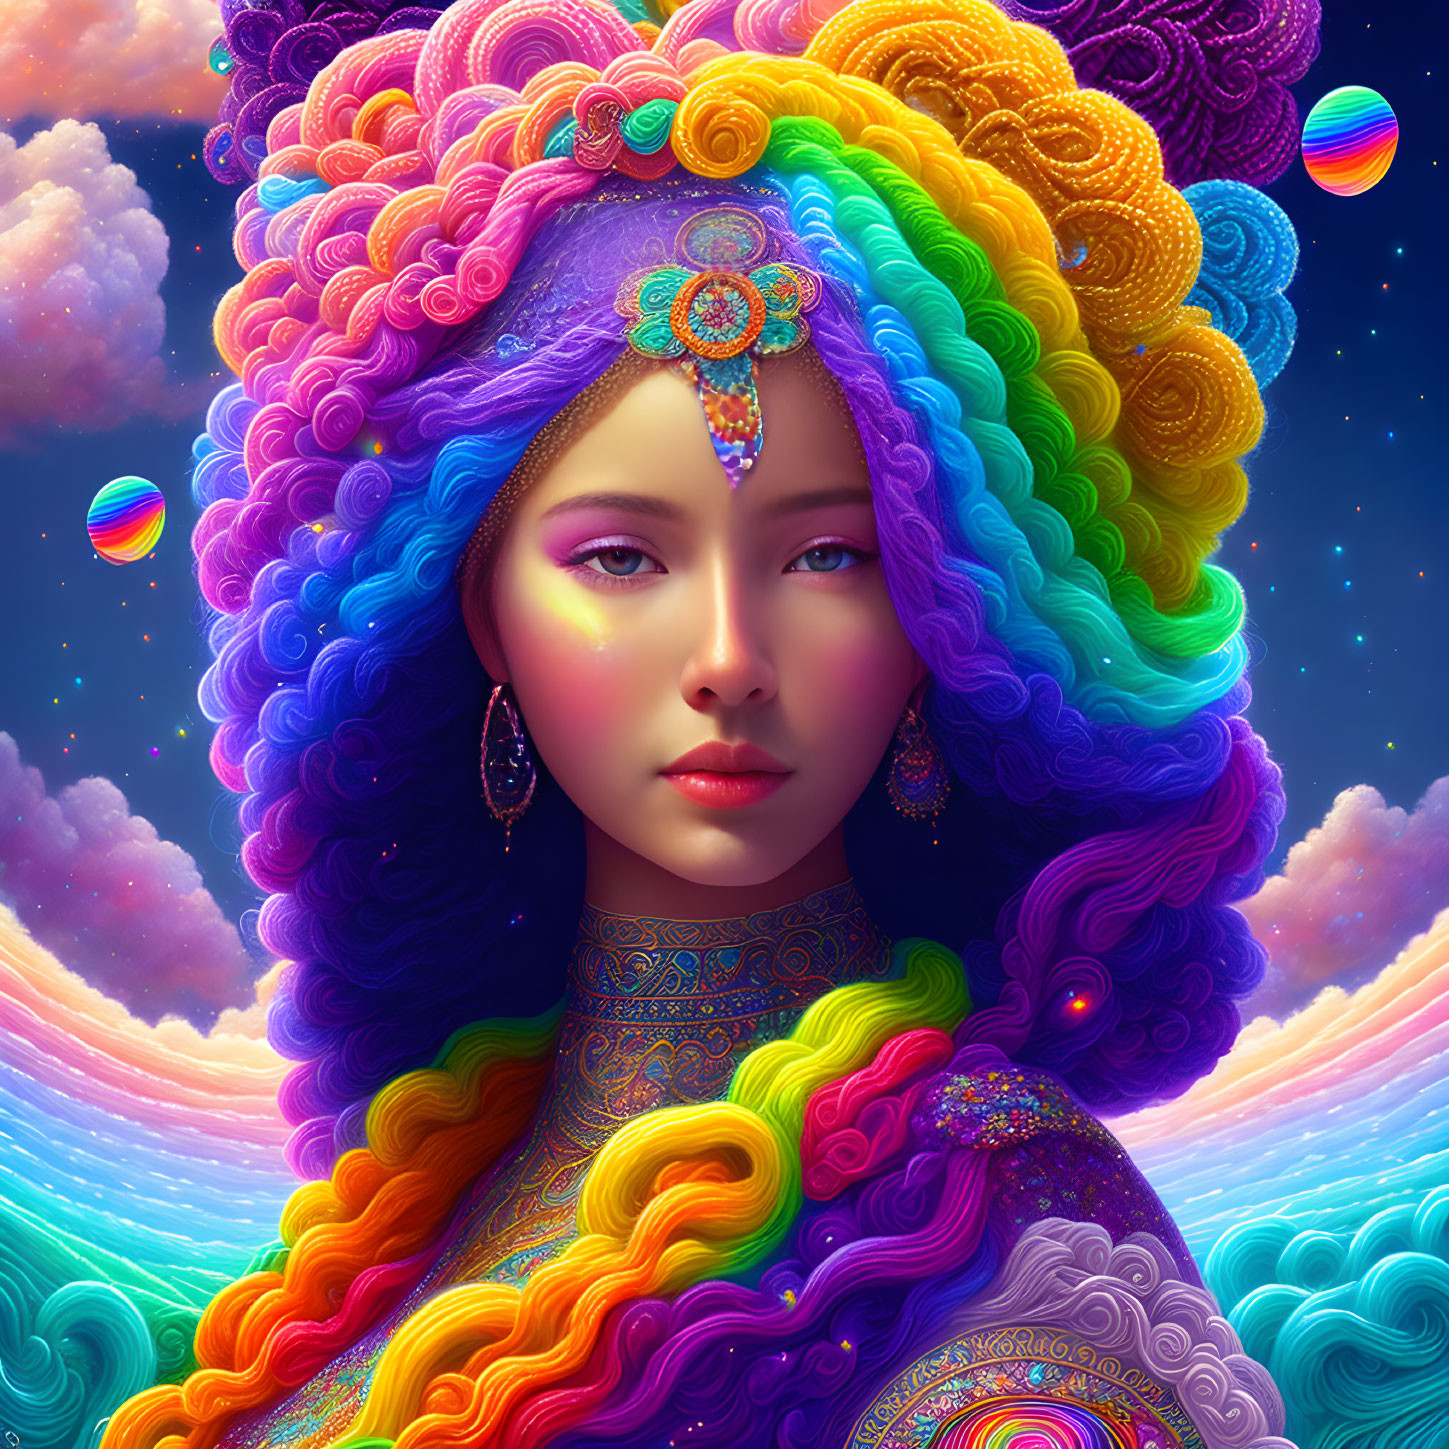 Colorful digital artwork of woman with curly hair and celestial background